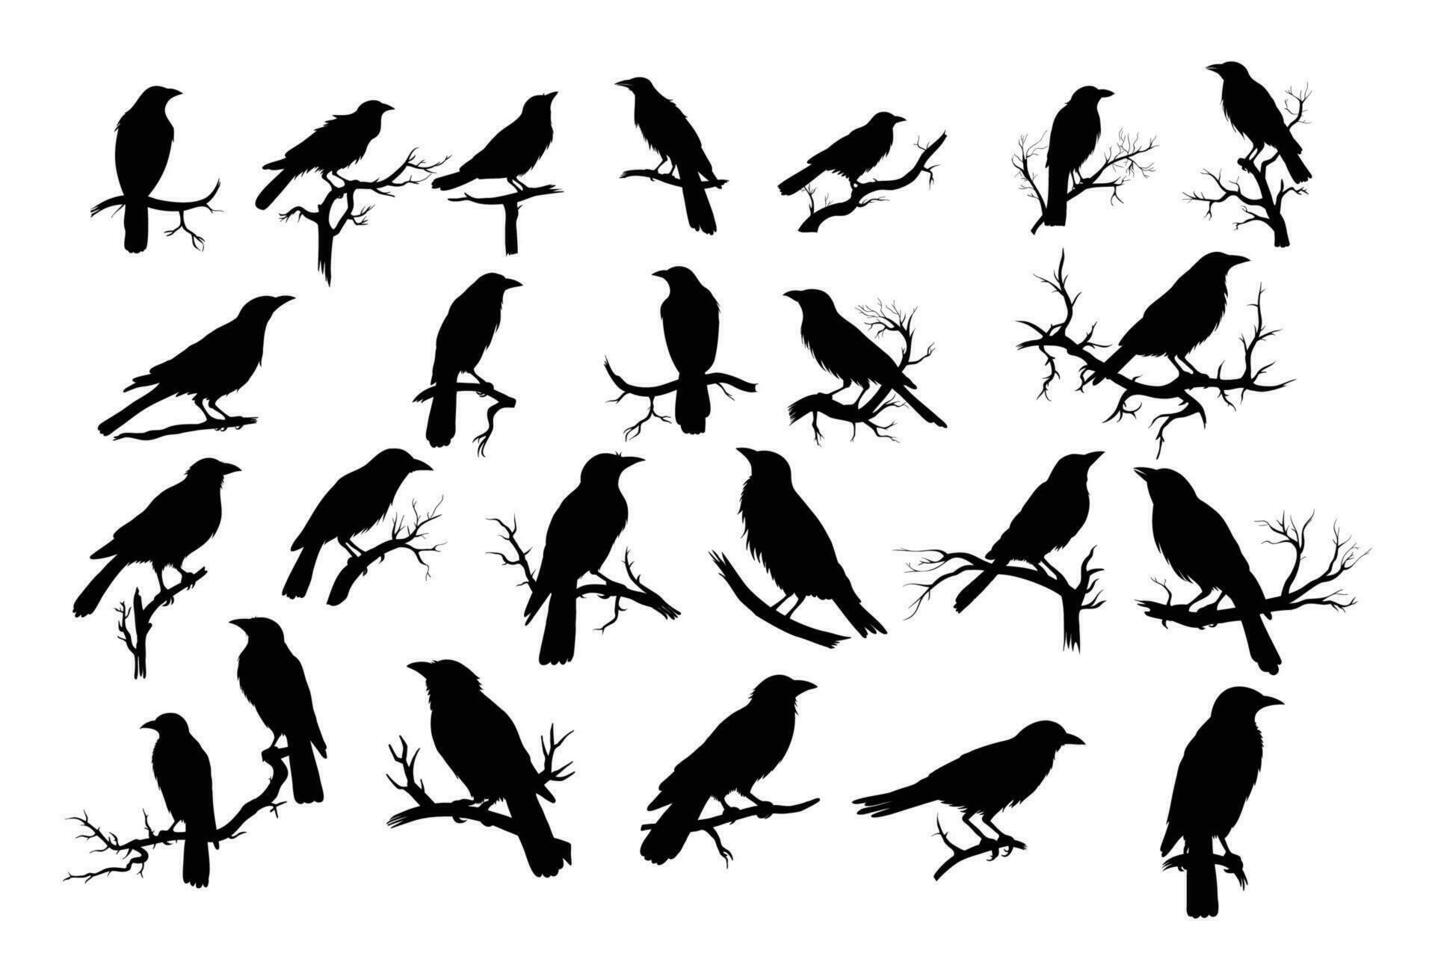 crows on tree branch silhouette vector